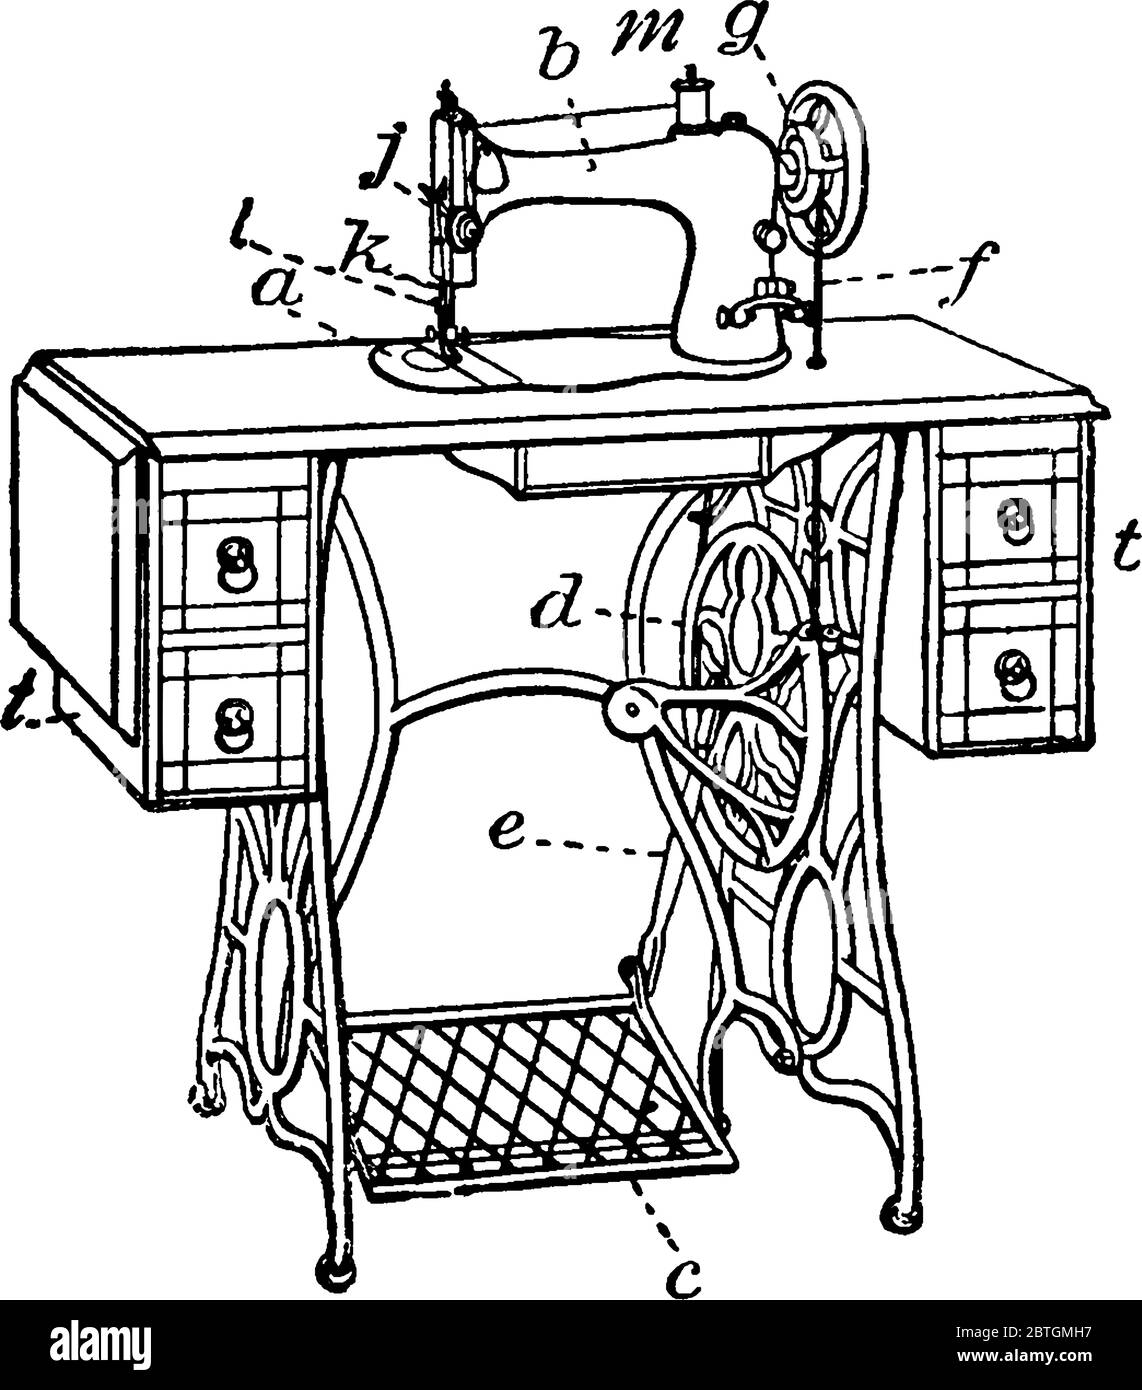 Sewing machine illustration drawing engraving ink line art vector  Stock Vector  Adobe Stock